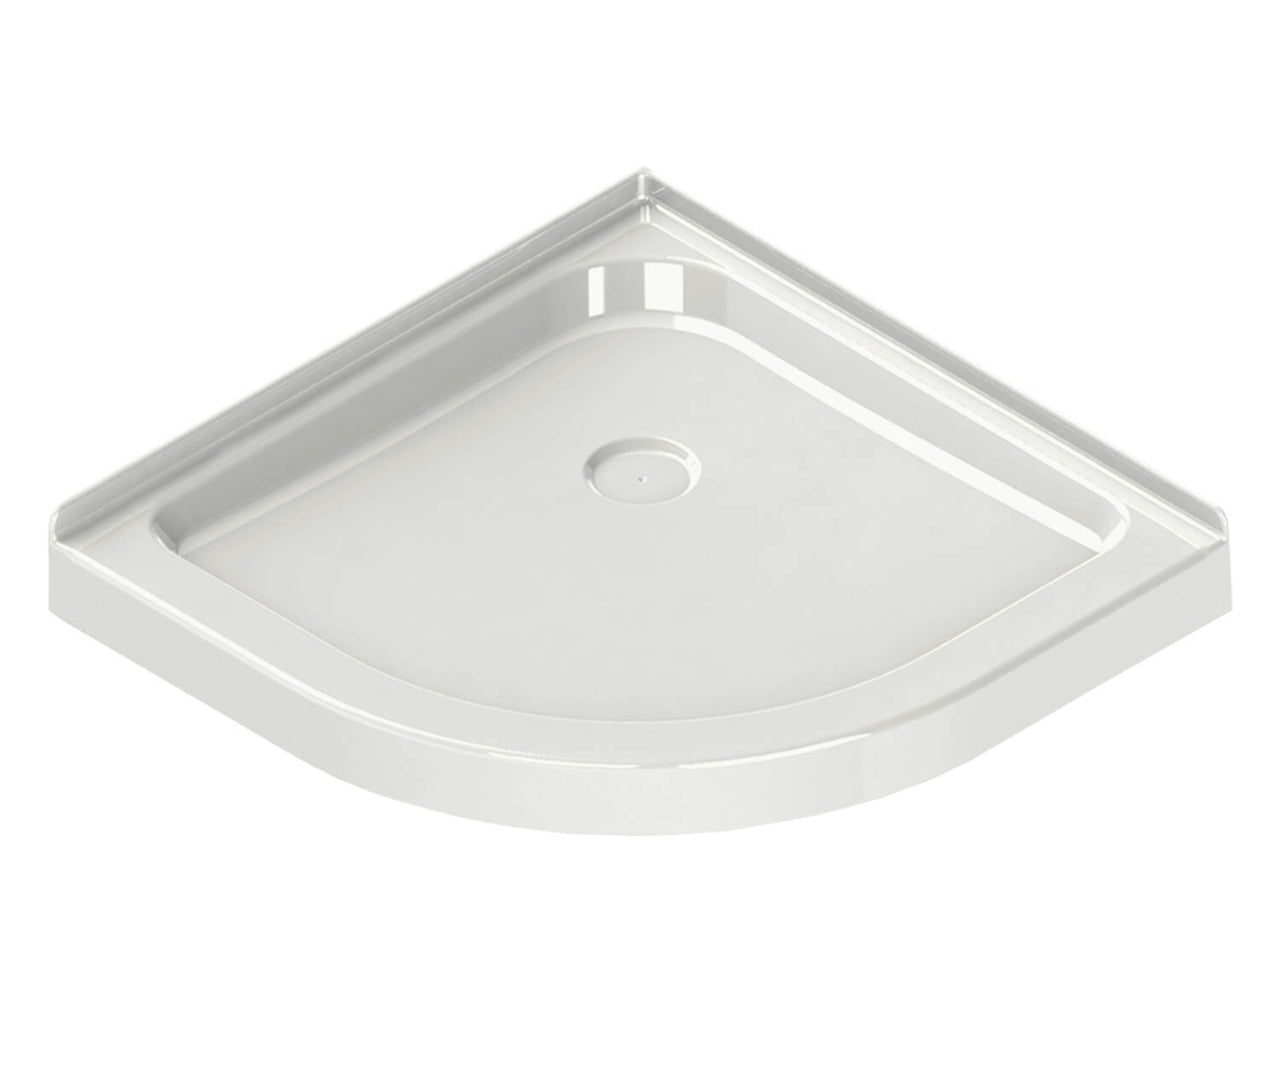 Neo-round Base 36 - 3 in. Acrylic Corner Left or Right Shower Base - BNGBath